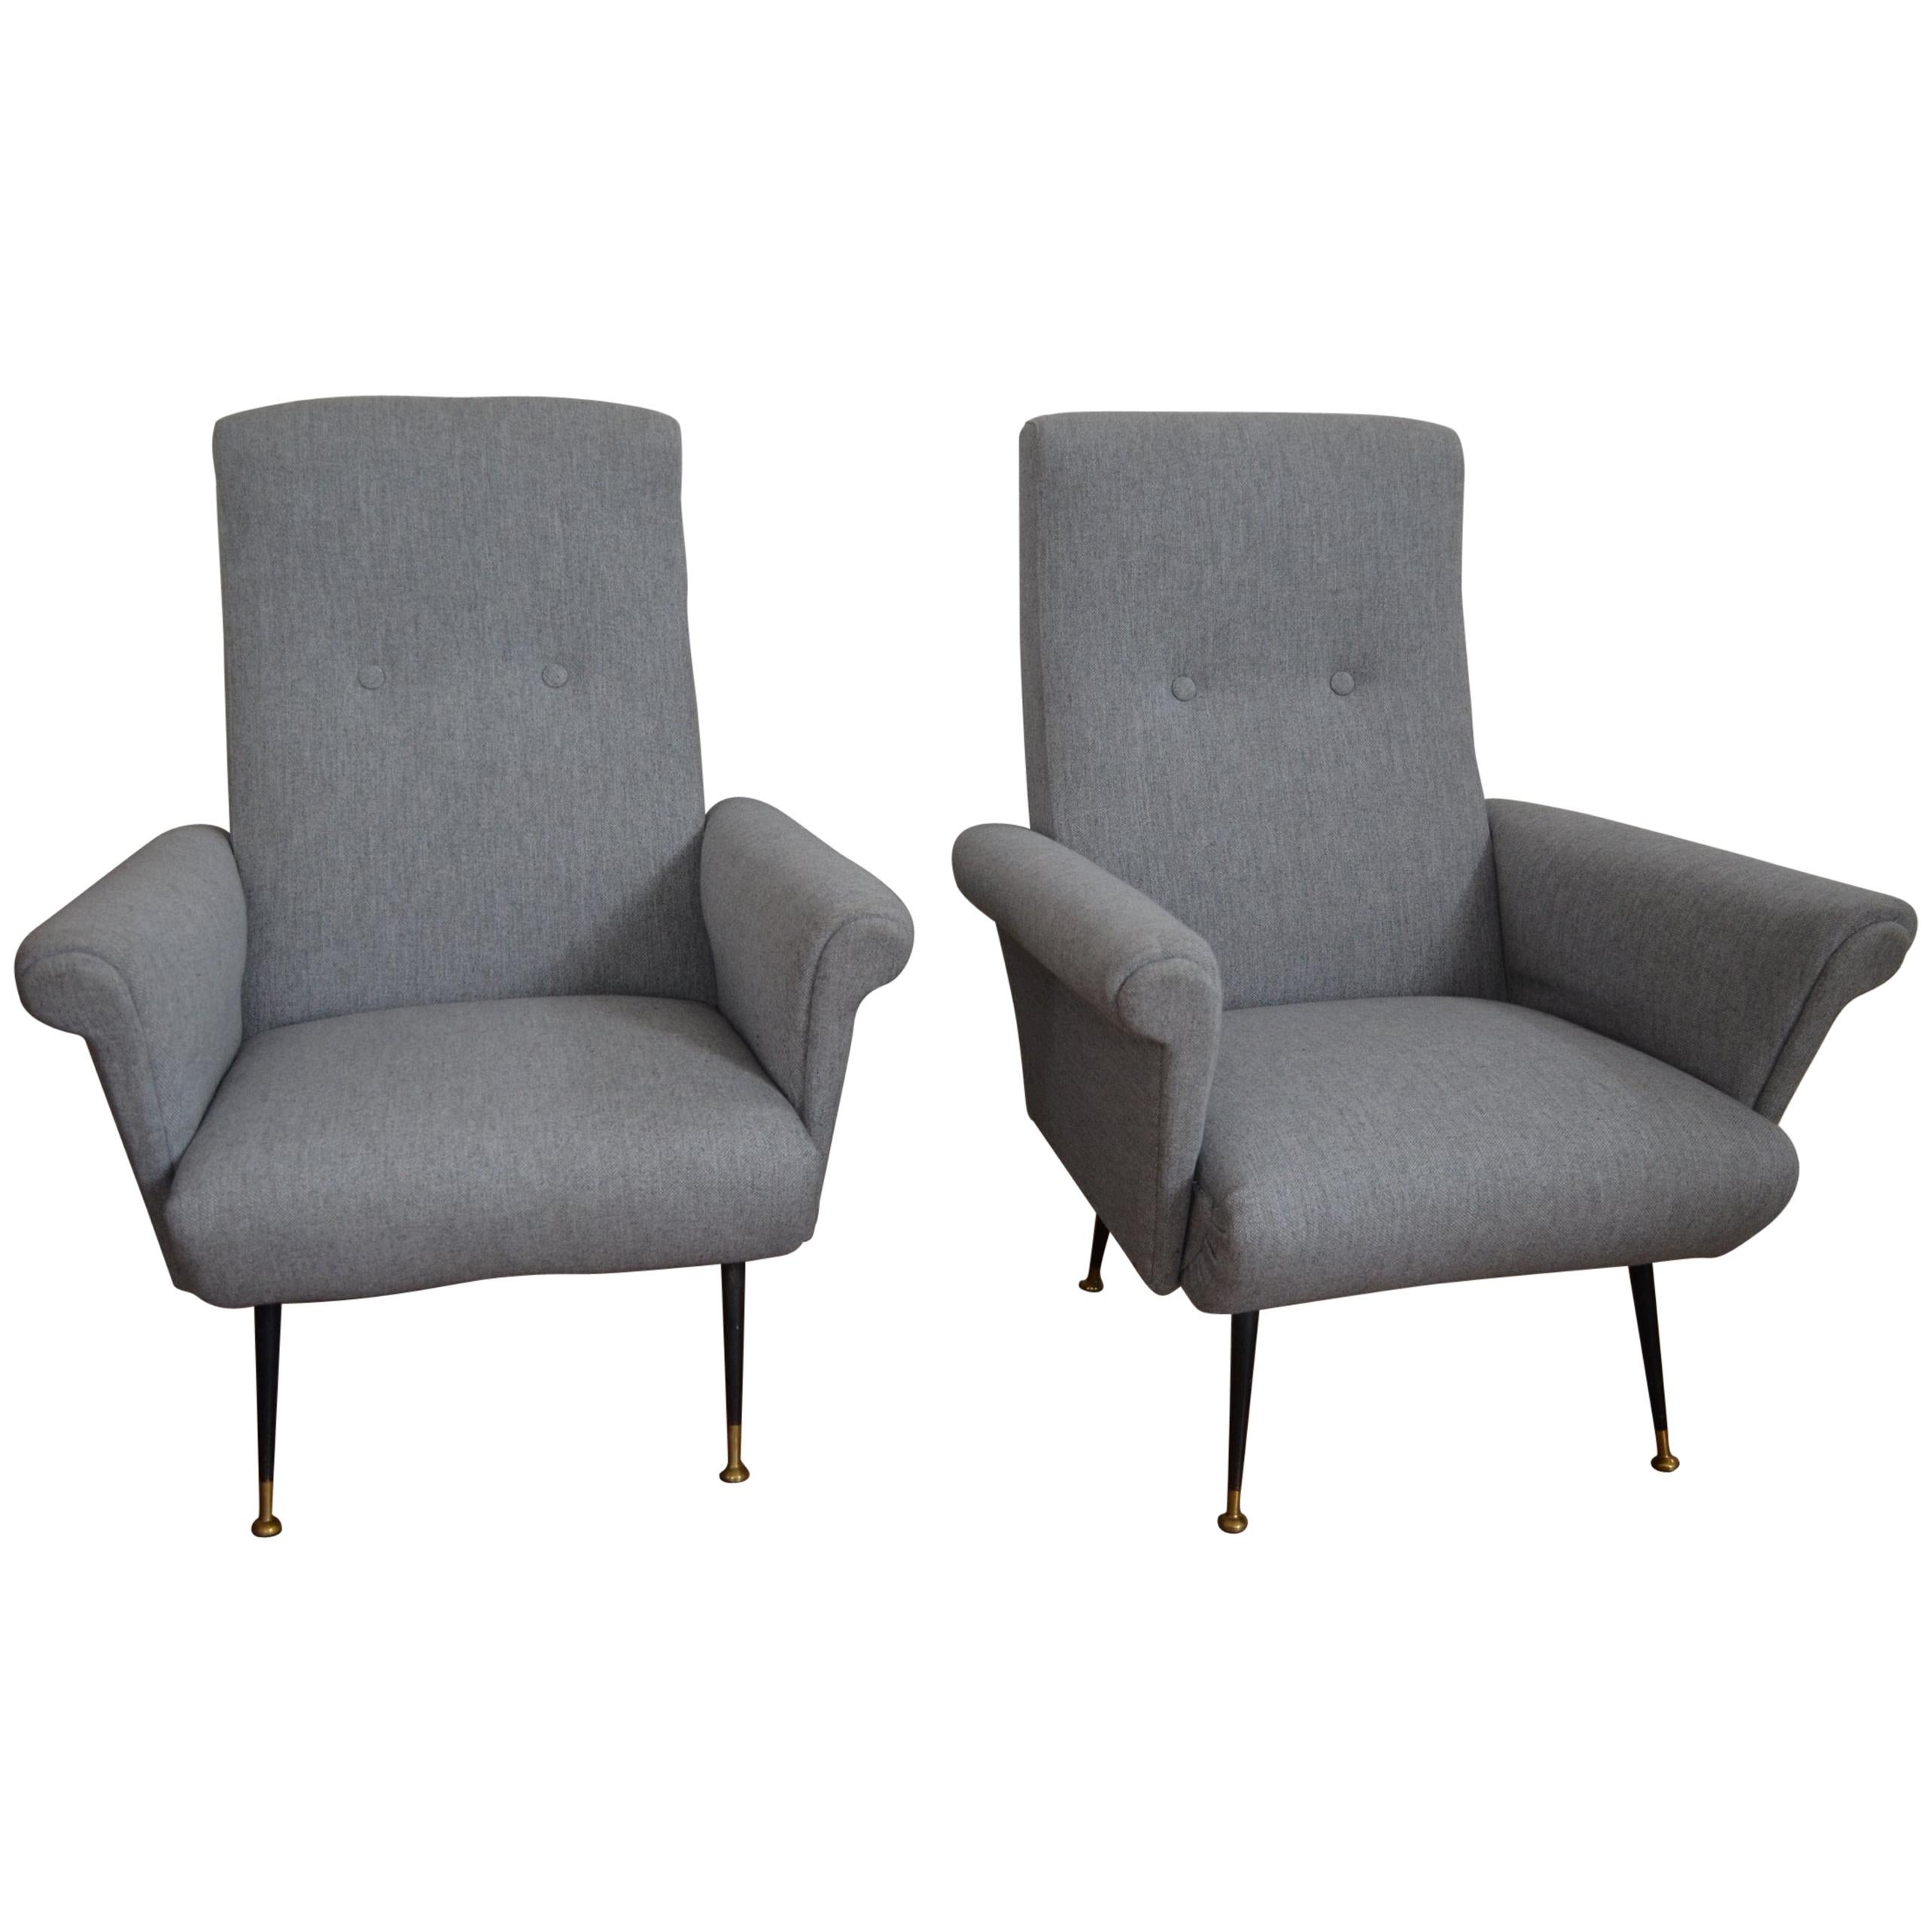 Pair of Italian 1950s Armchairs For Sale